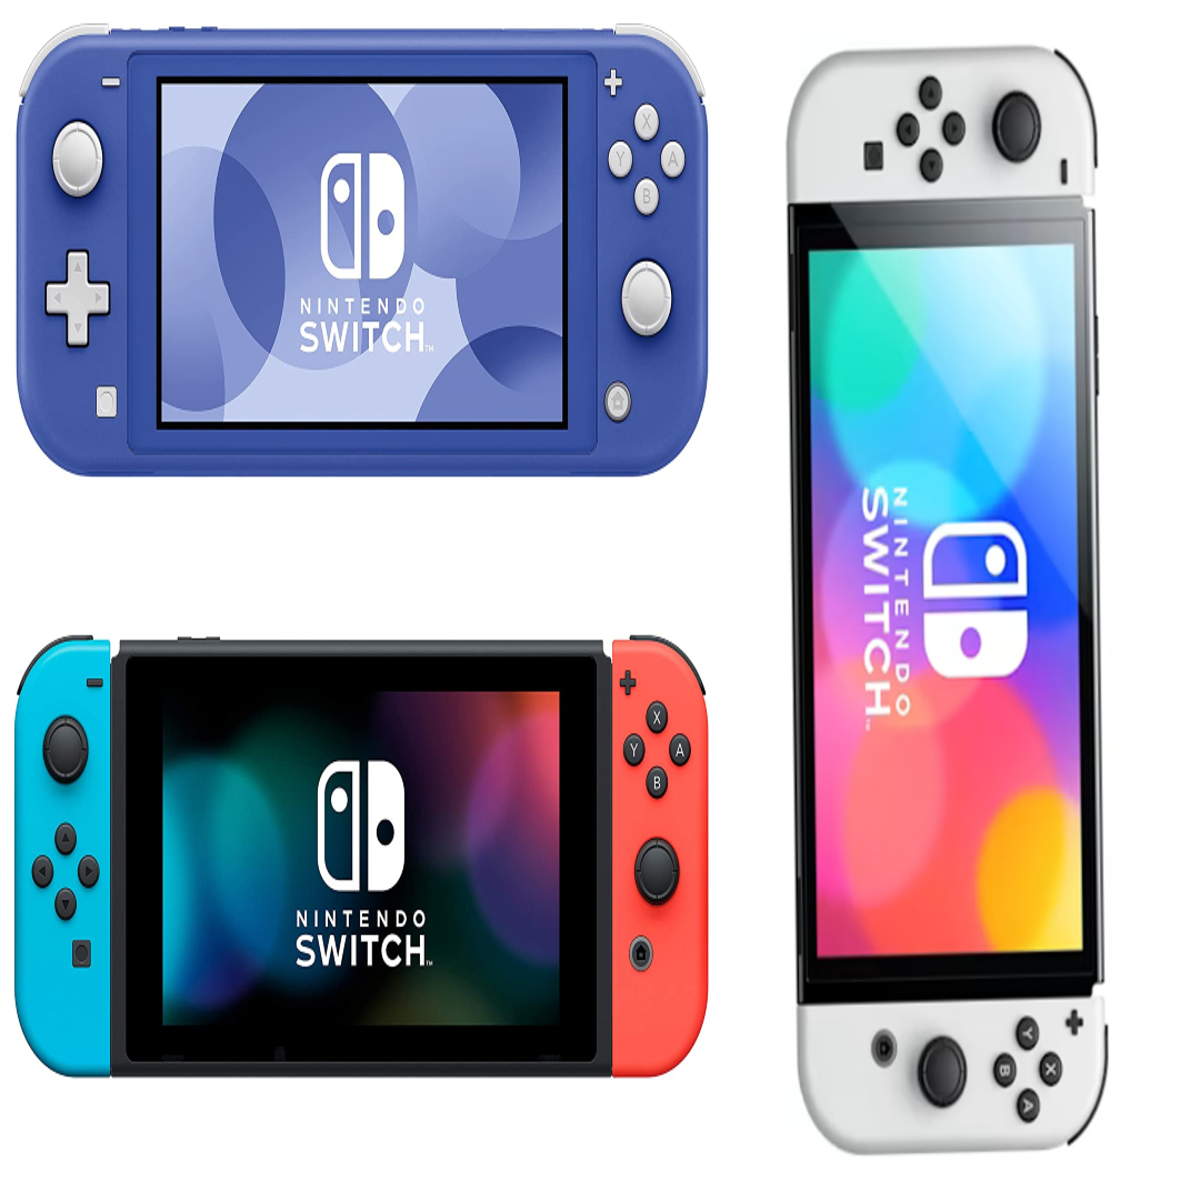 Nintendo Switch in Neon with Hyrule Warriors and Accessory Kit